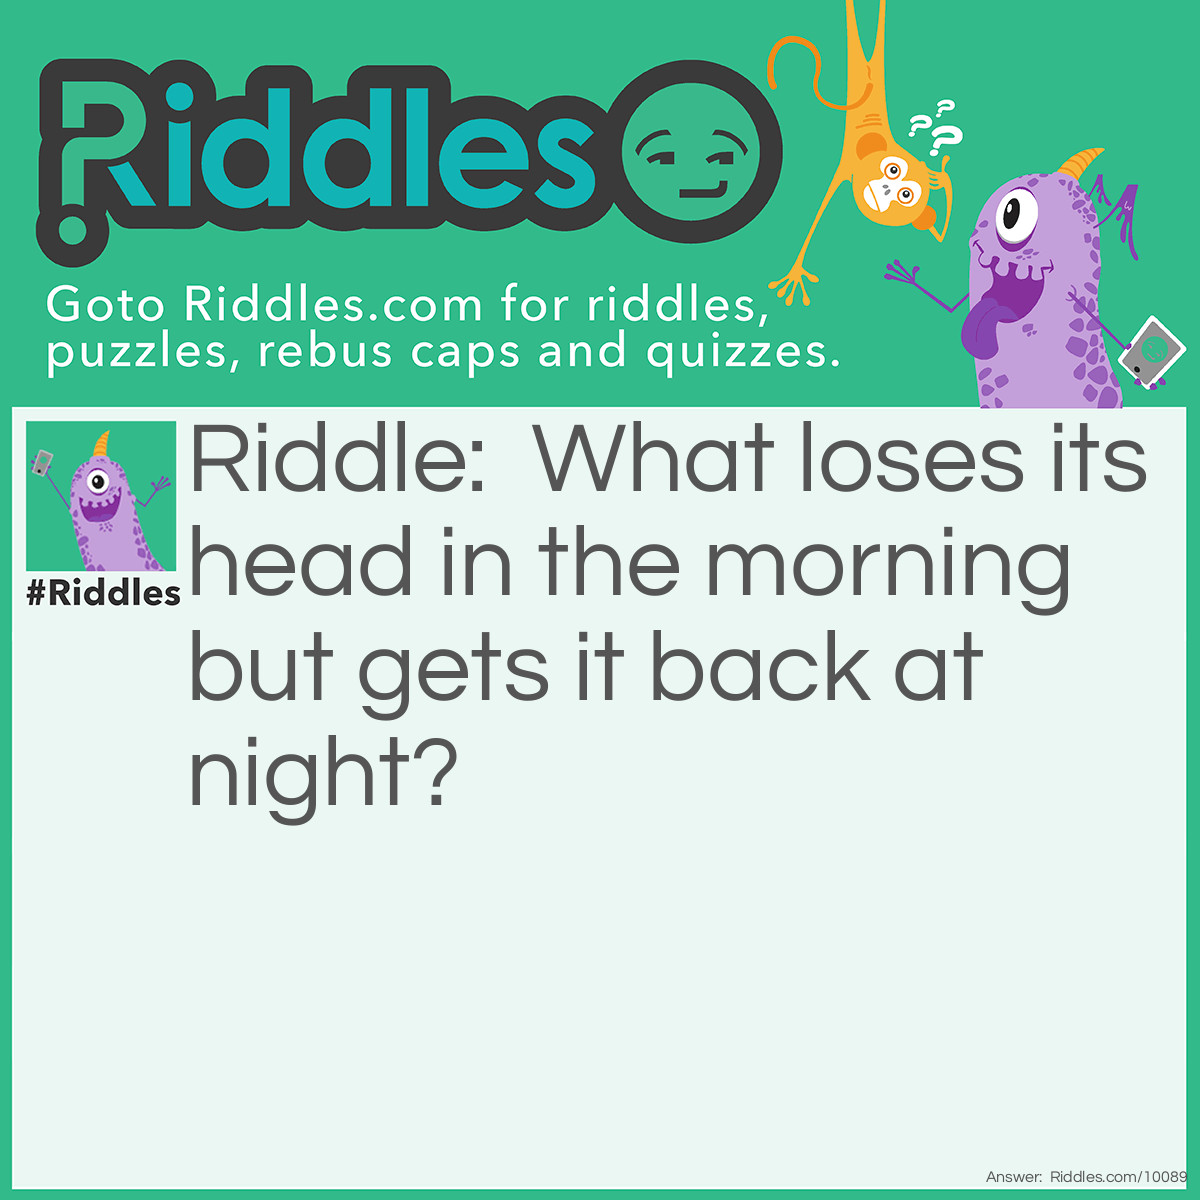 Riddle: What loses its head in the morning but gets it back at night? Answer: a pillow